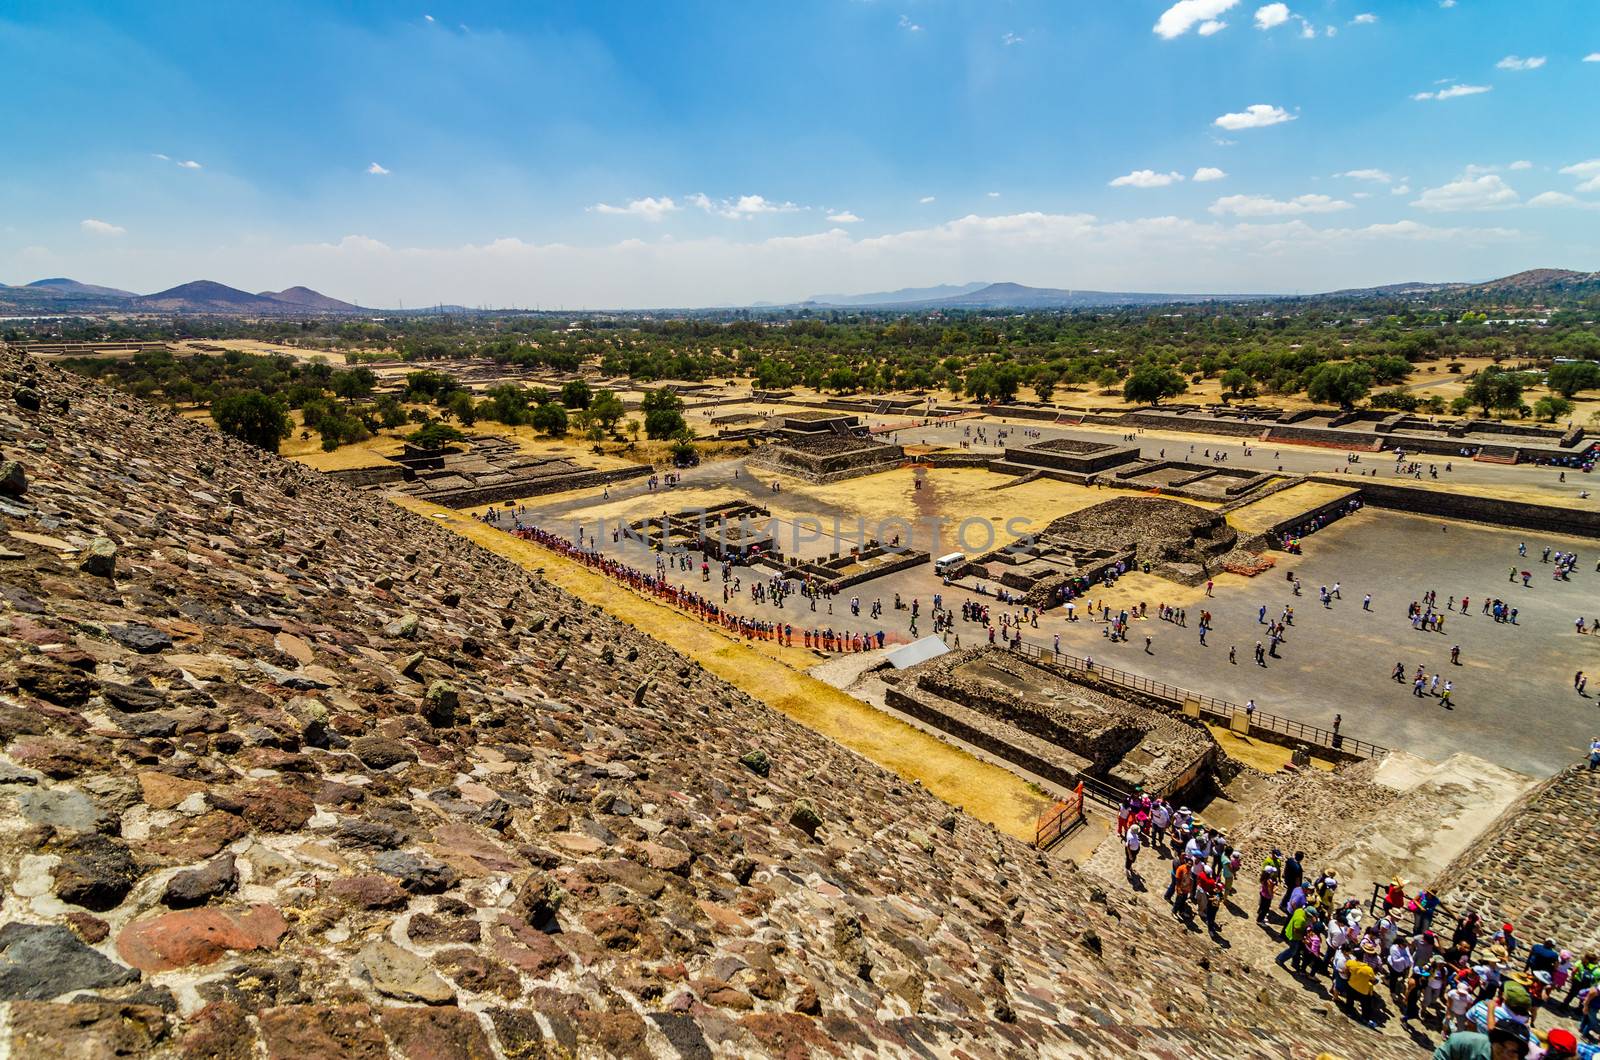 View of Teotihuacan ruins near Mexico City as seen from the Temple of the Sun